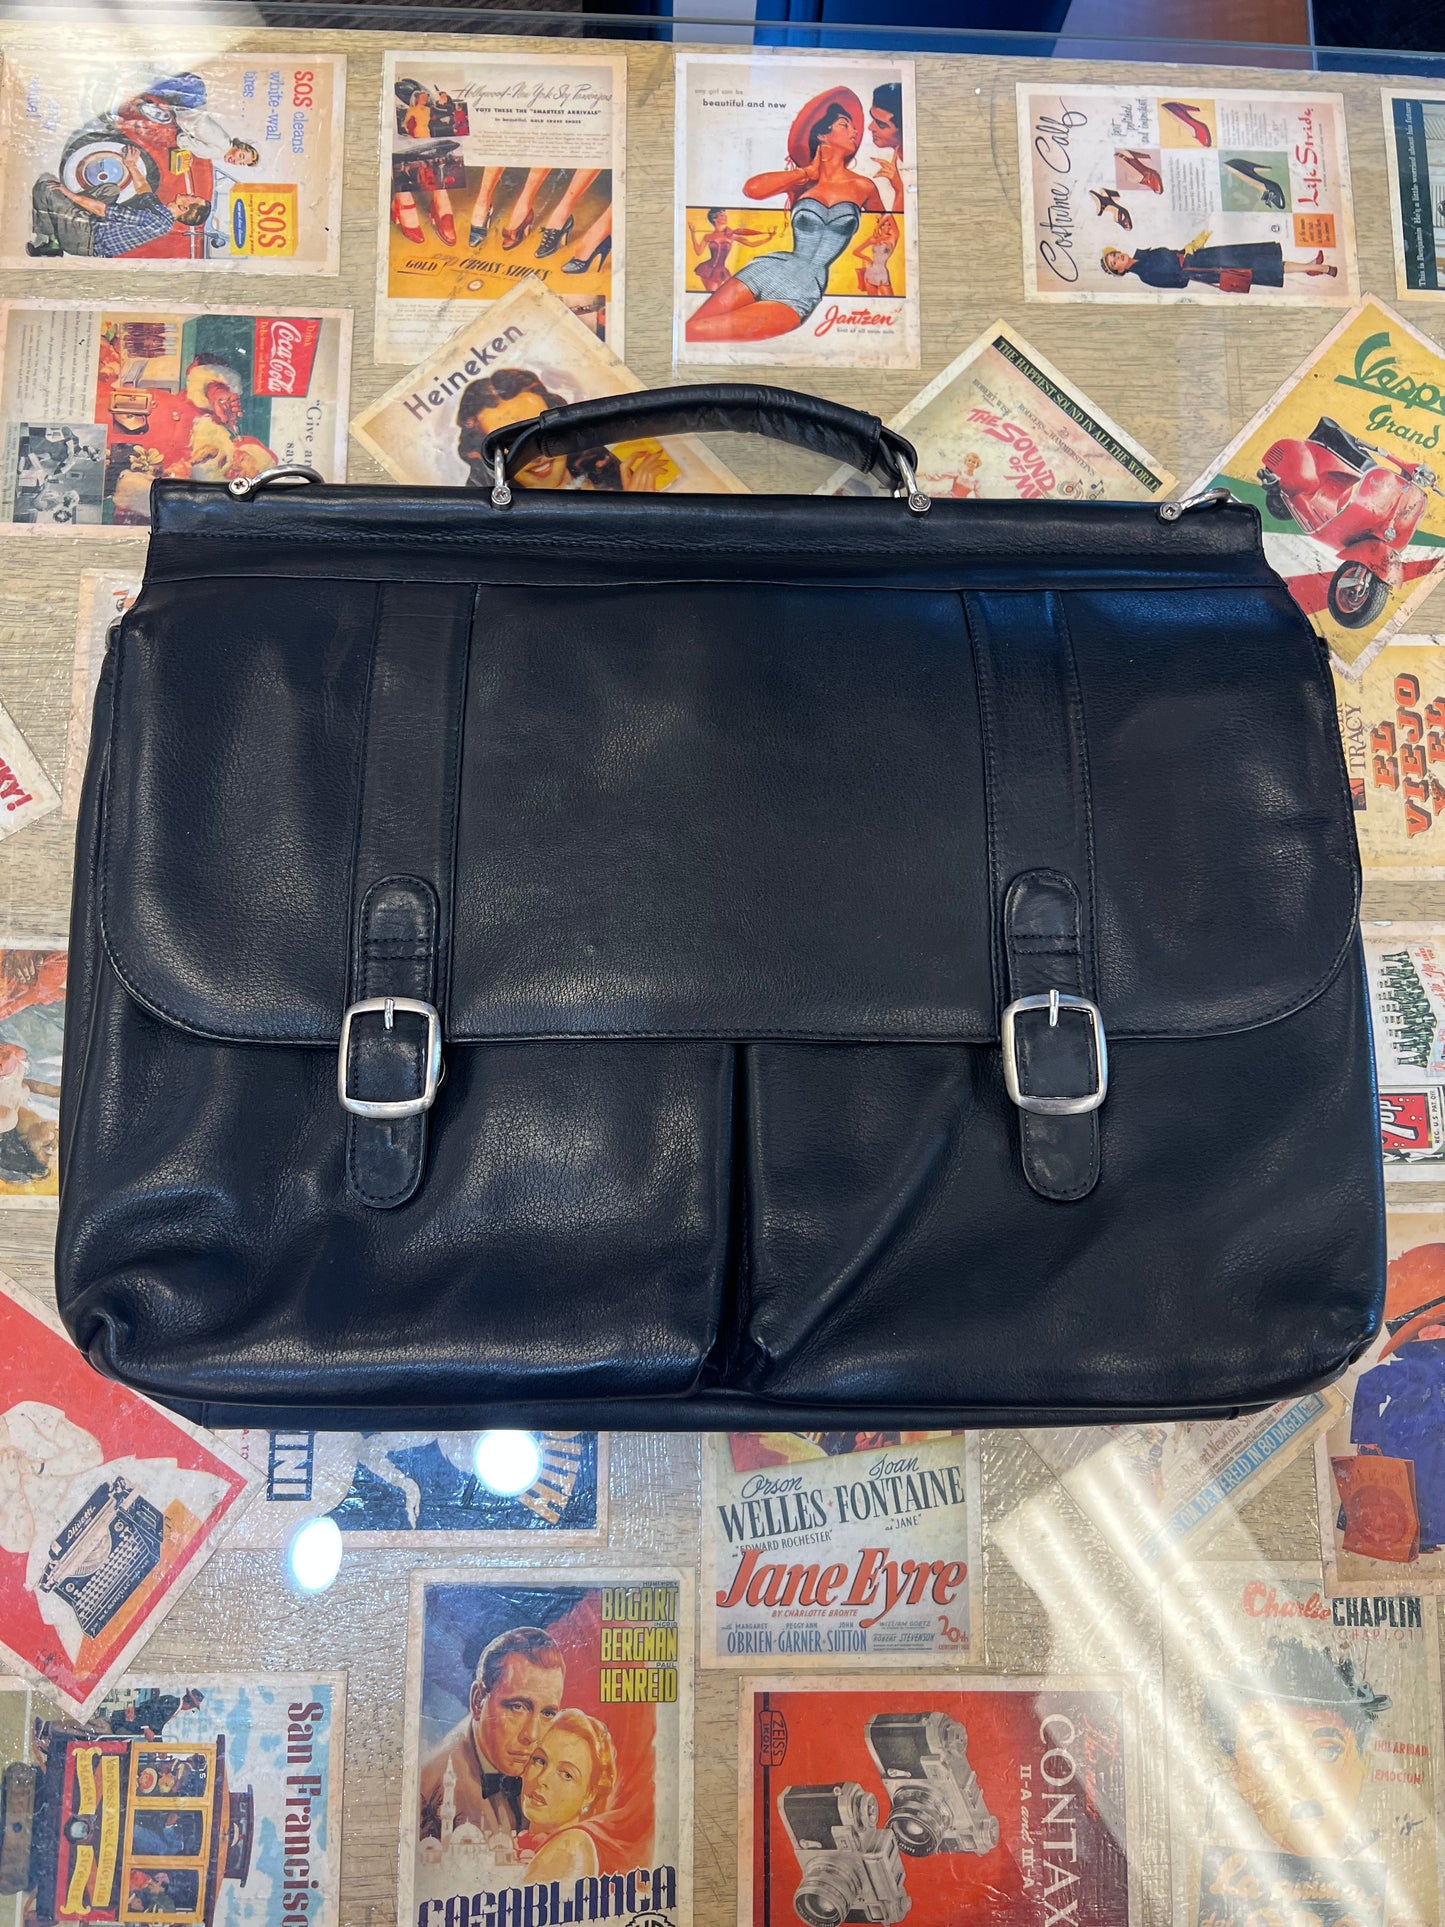 David King Dowel Top Leather Briefcase